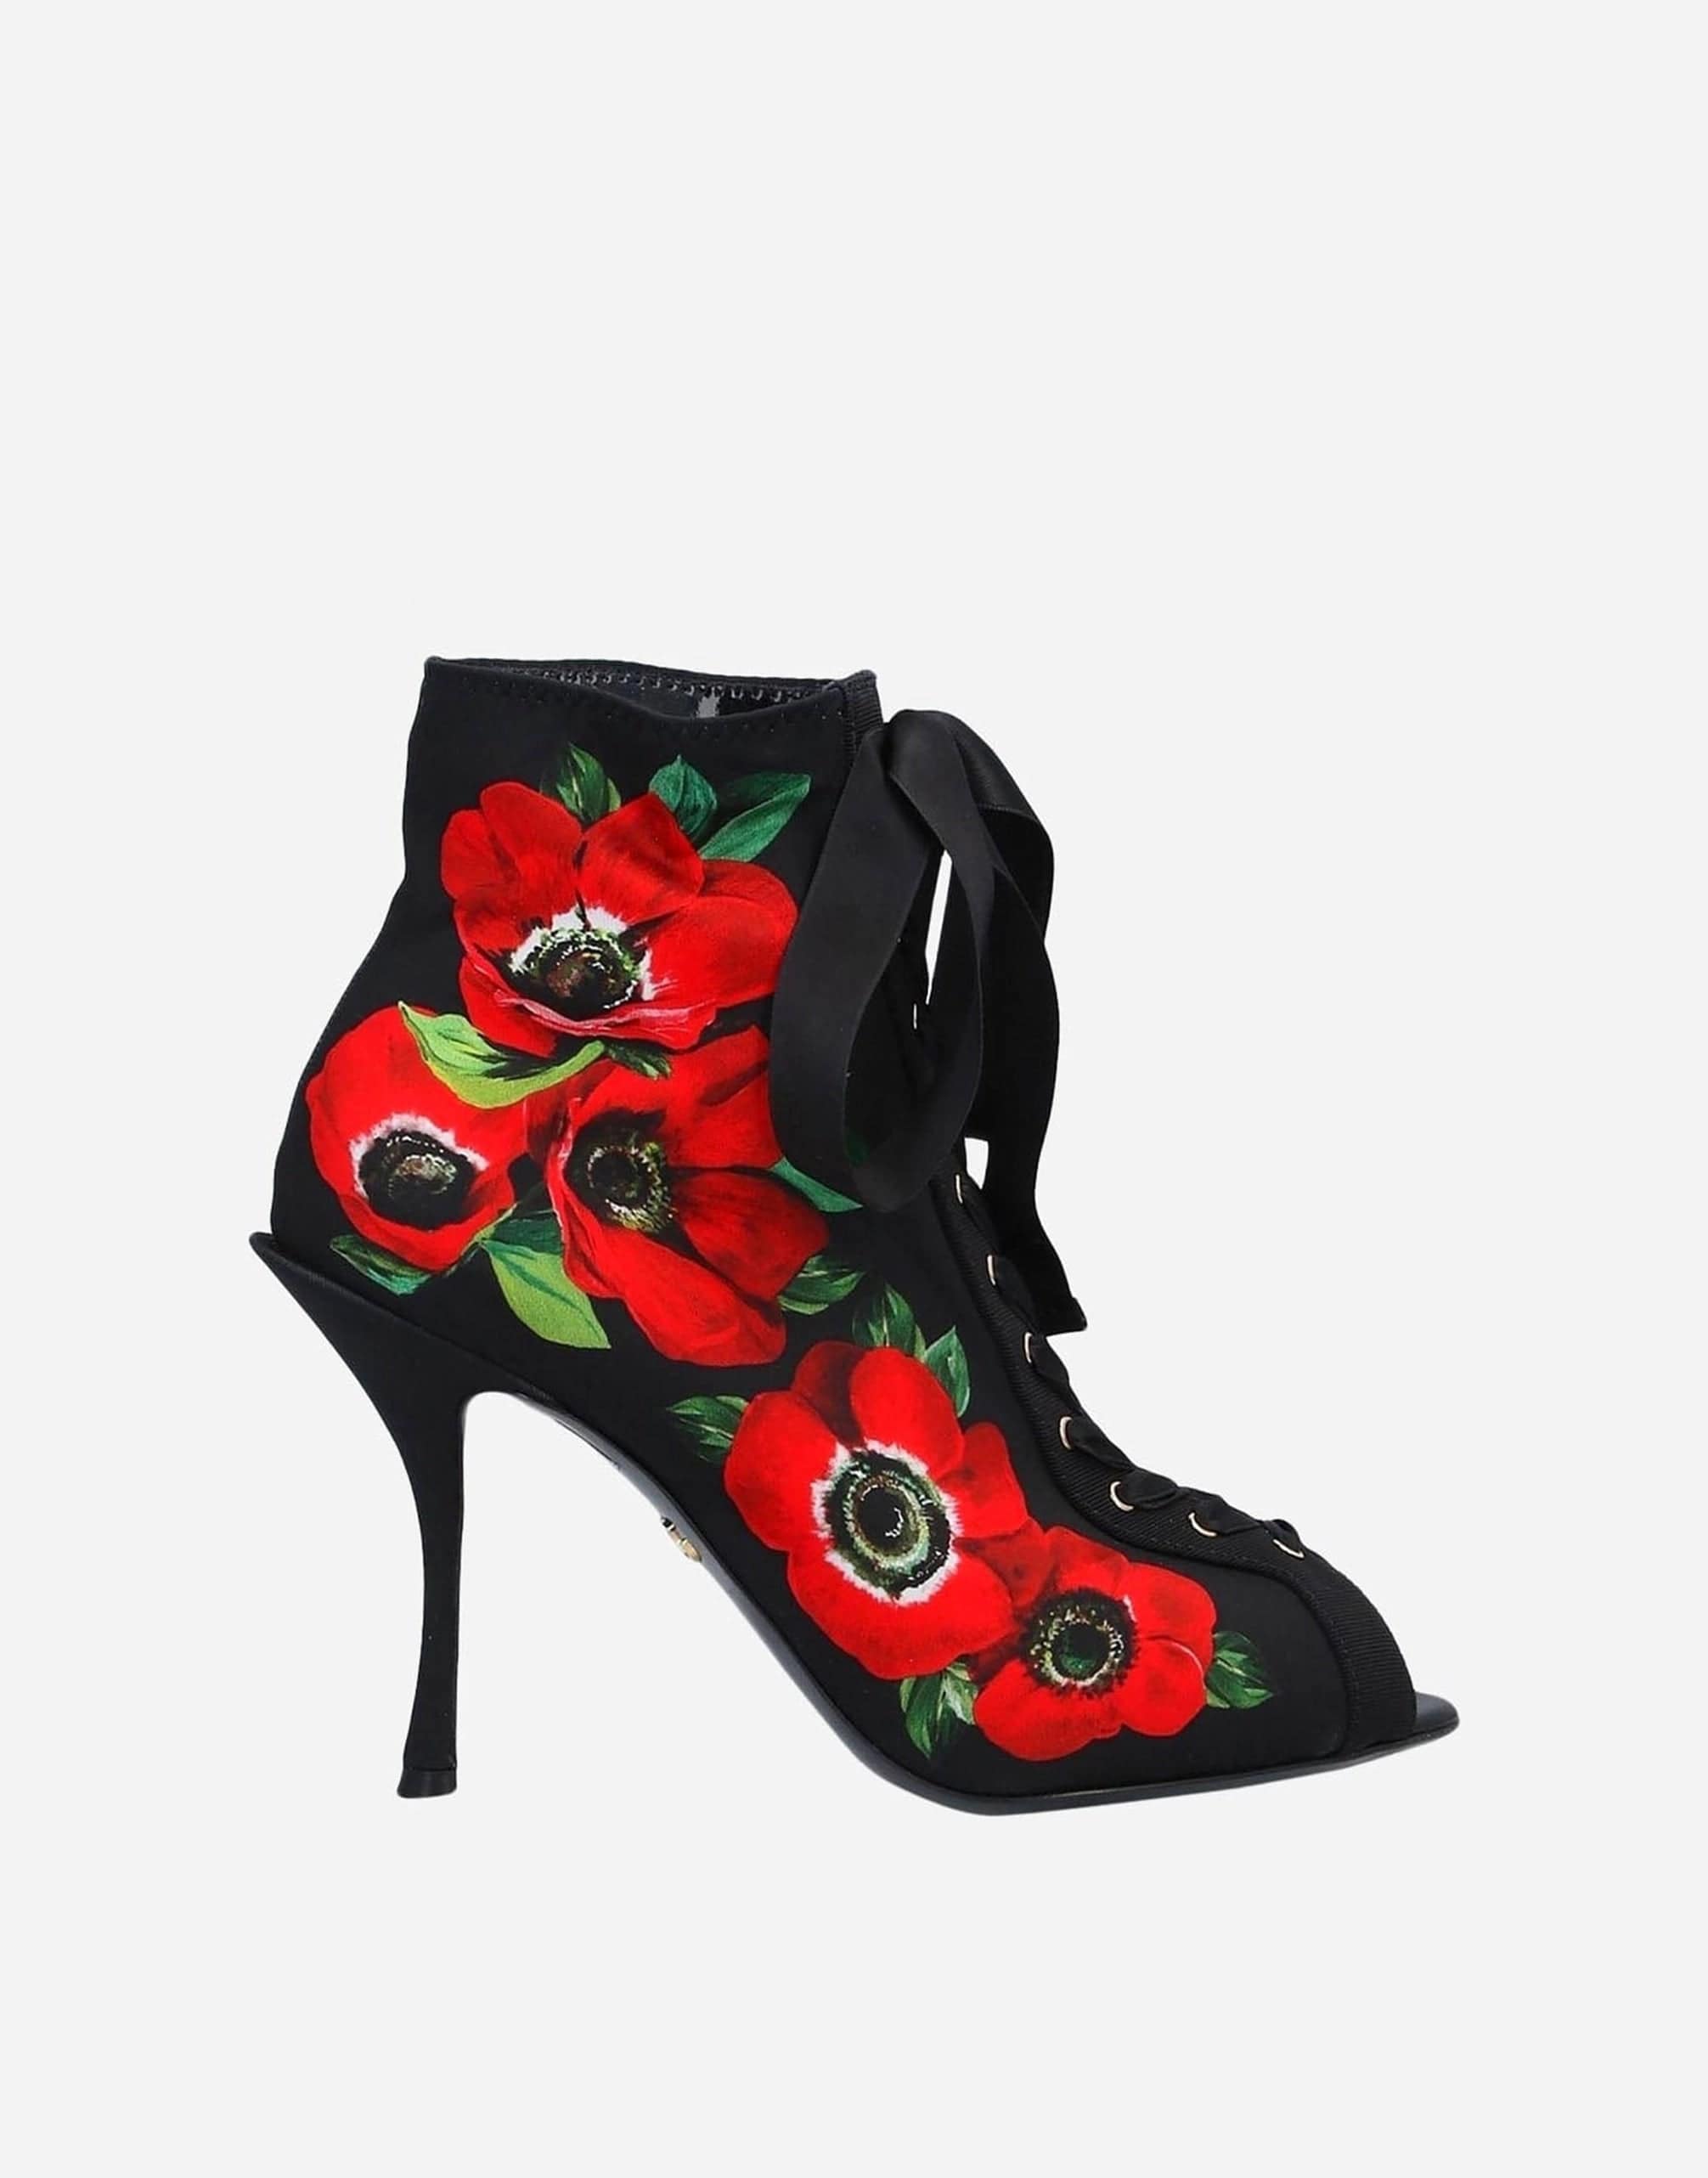 Dolce & Gabbana Floral-Print Jersey Ankle Boots